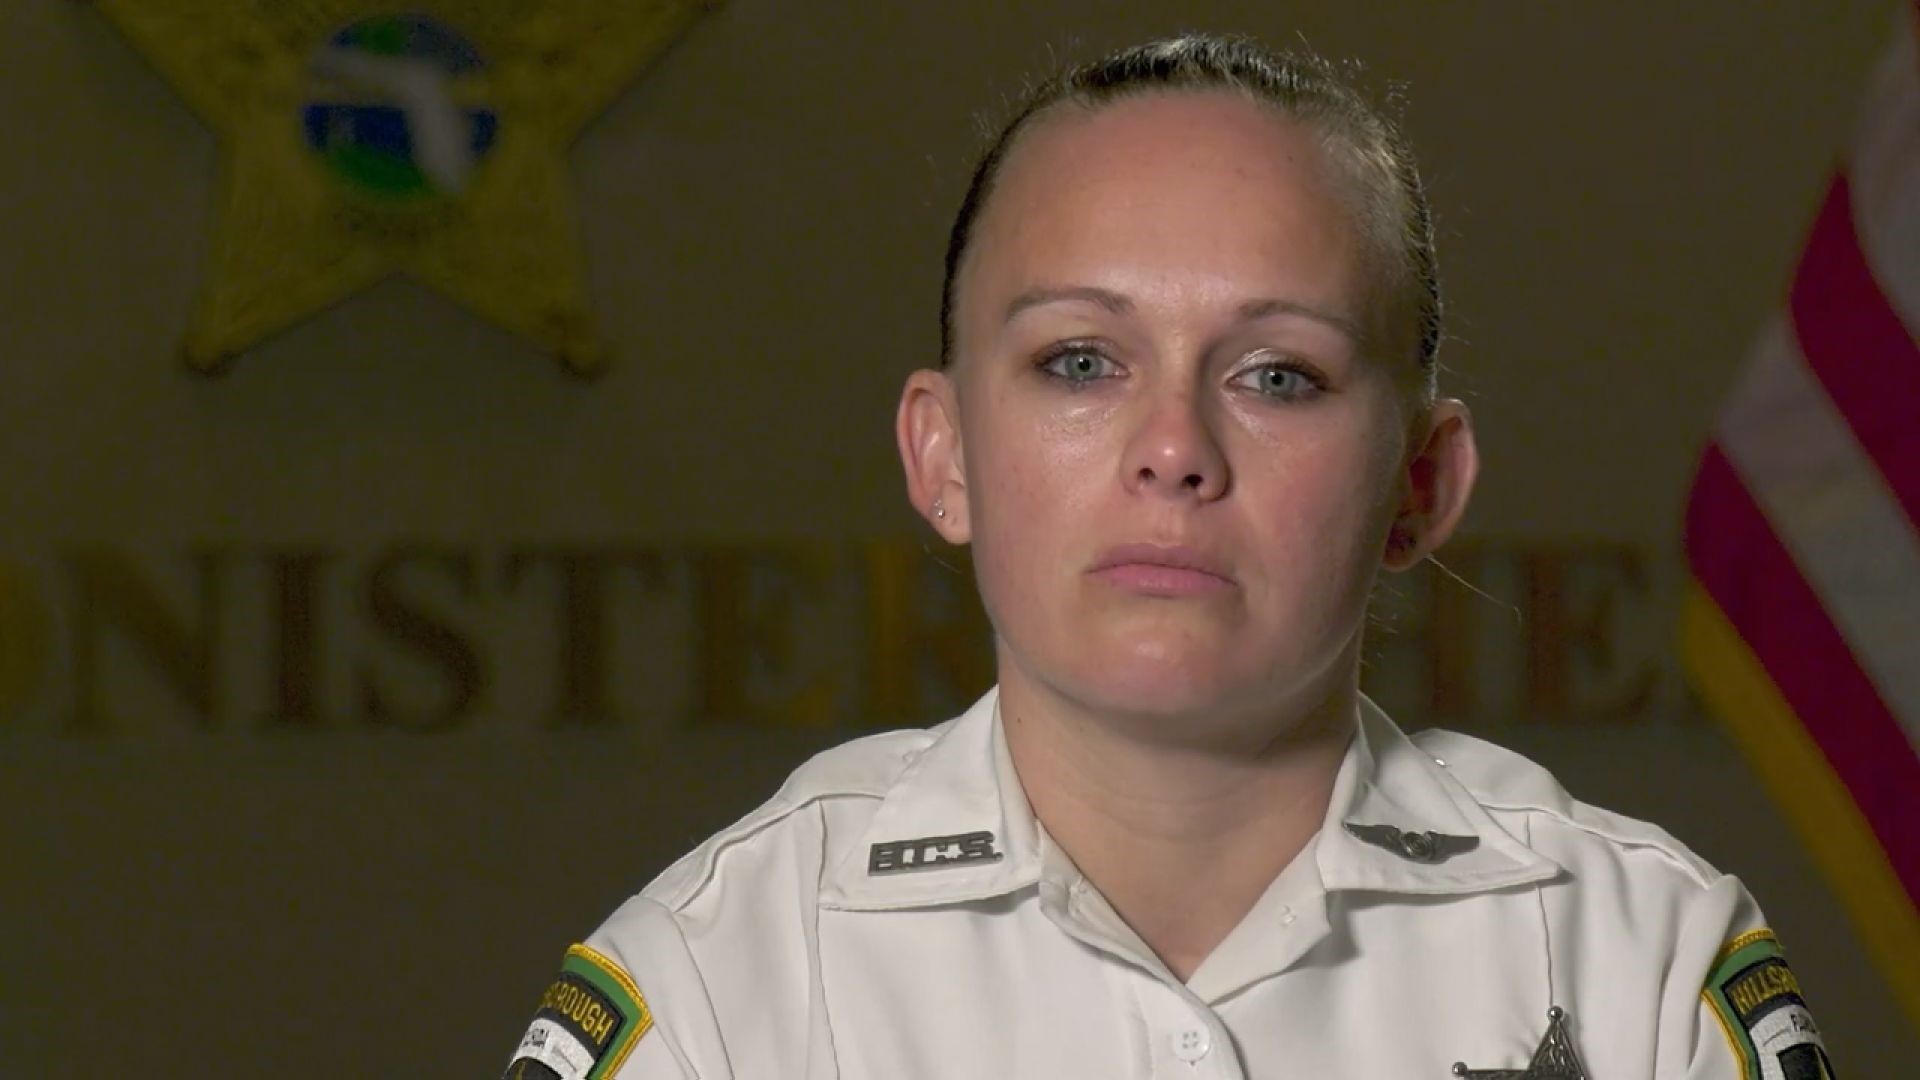 Deputy Caitlin LaVigne fought back tears this week as she remembered her father, a fellow member of the Hillsborough County Sheriff's Office.